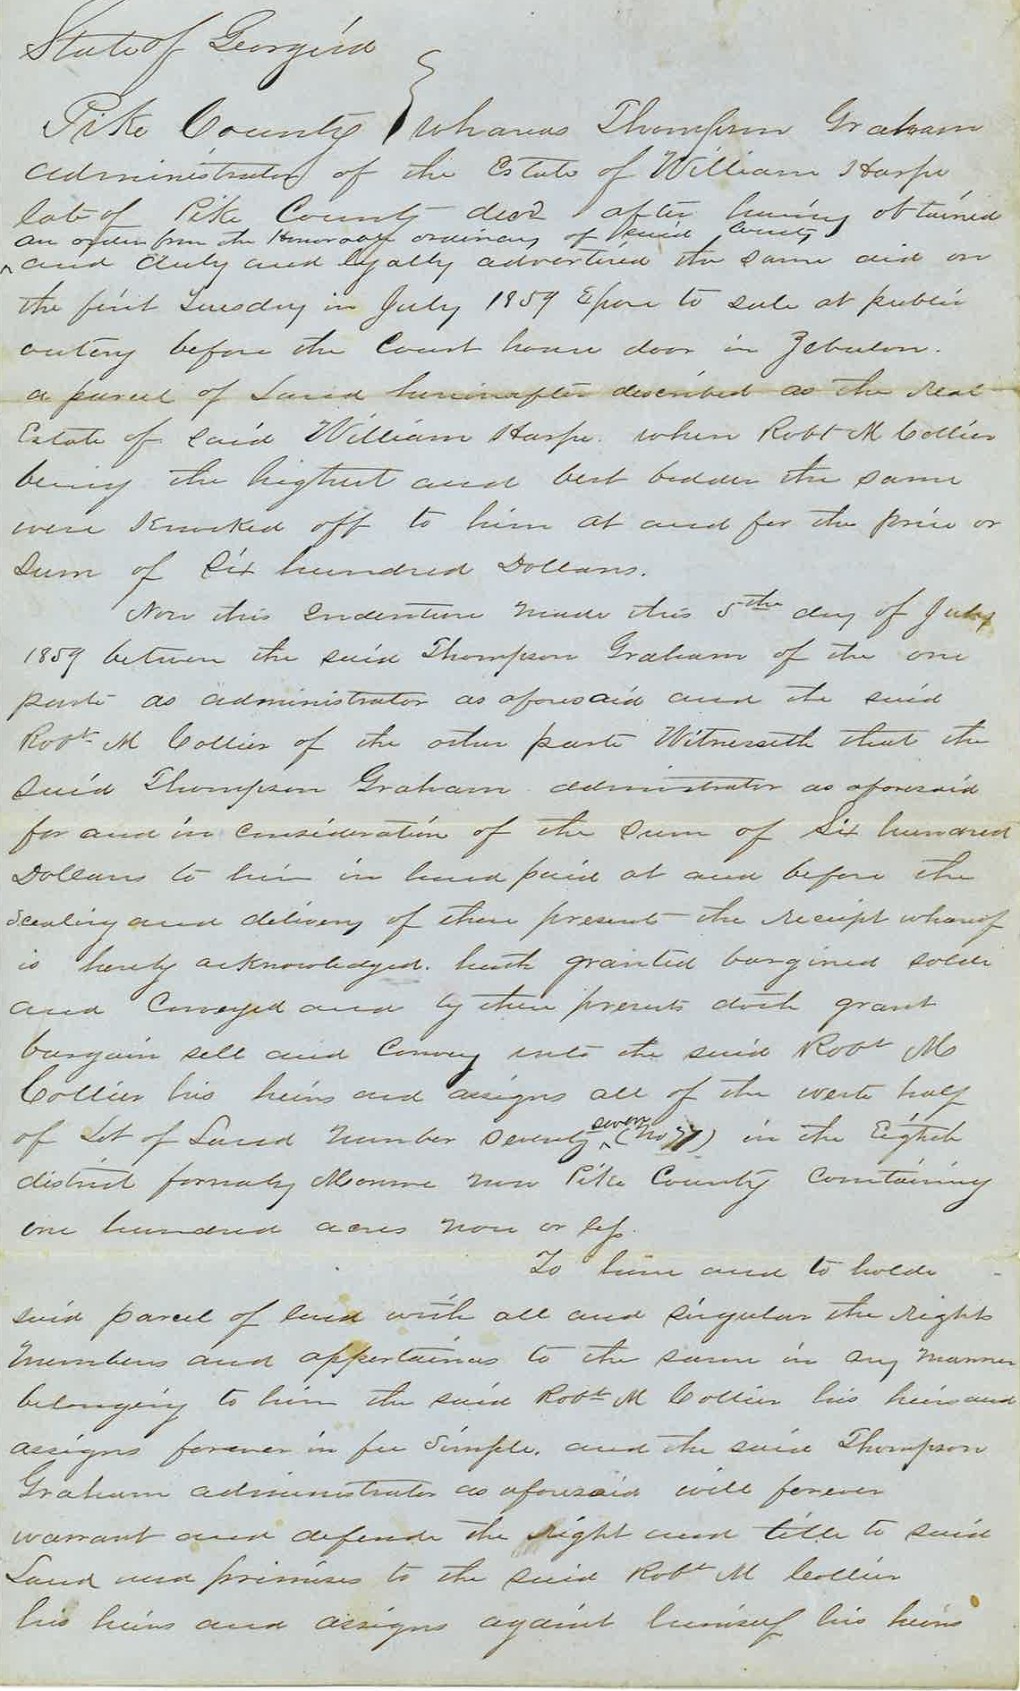 1859_07_05_Deed to RMC re 100 acres William Harp Estate_Page_1